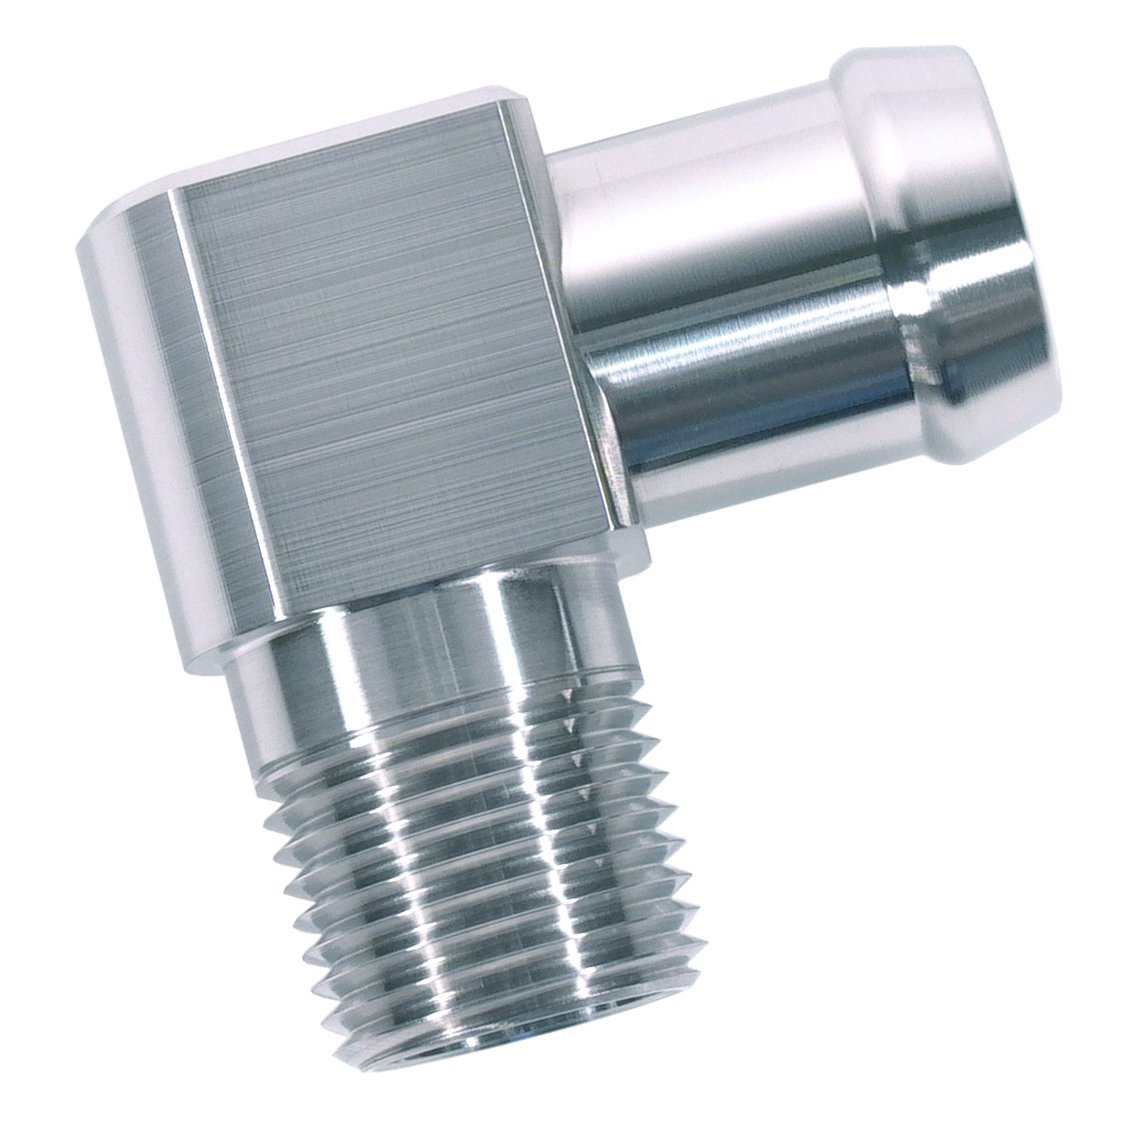 Heater Hose Fitting, 90-Degree, 1/2 in. NPT x 3/4 in. Hose Barb, 1 3/4 in. Length [Polished Finish]